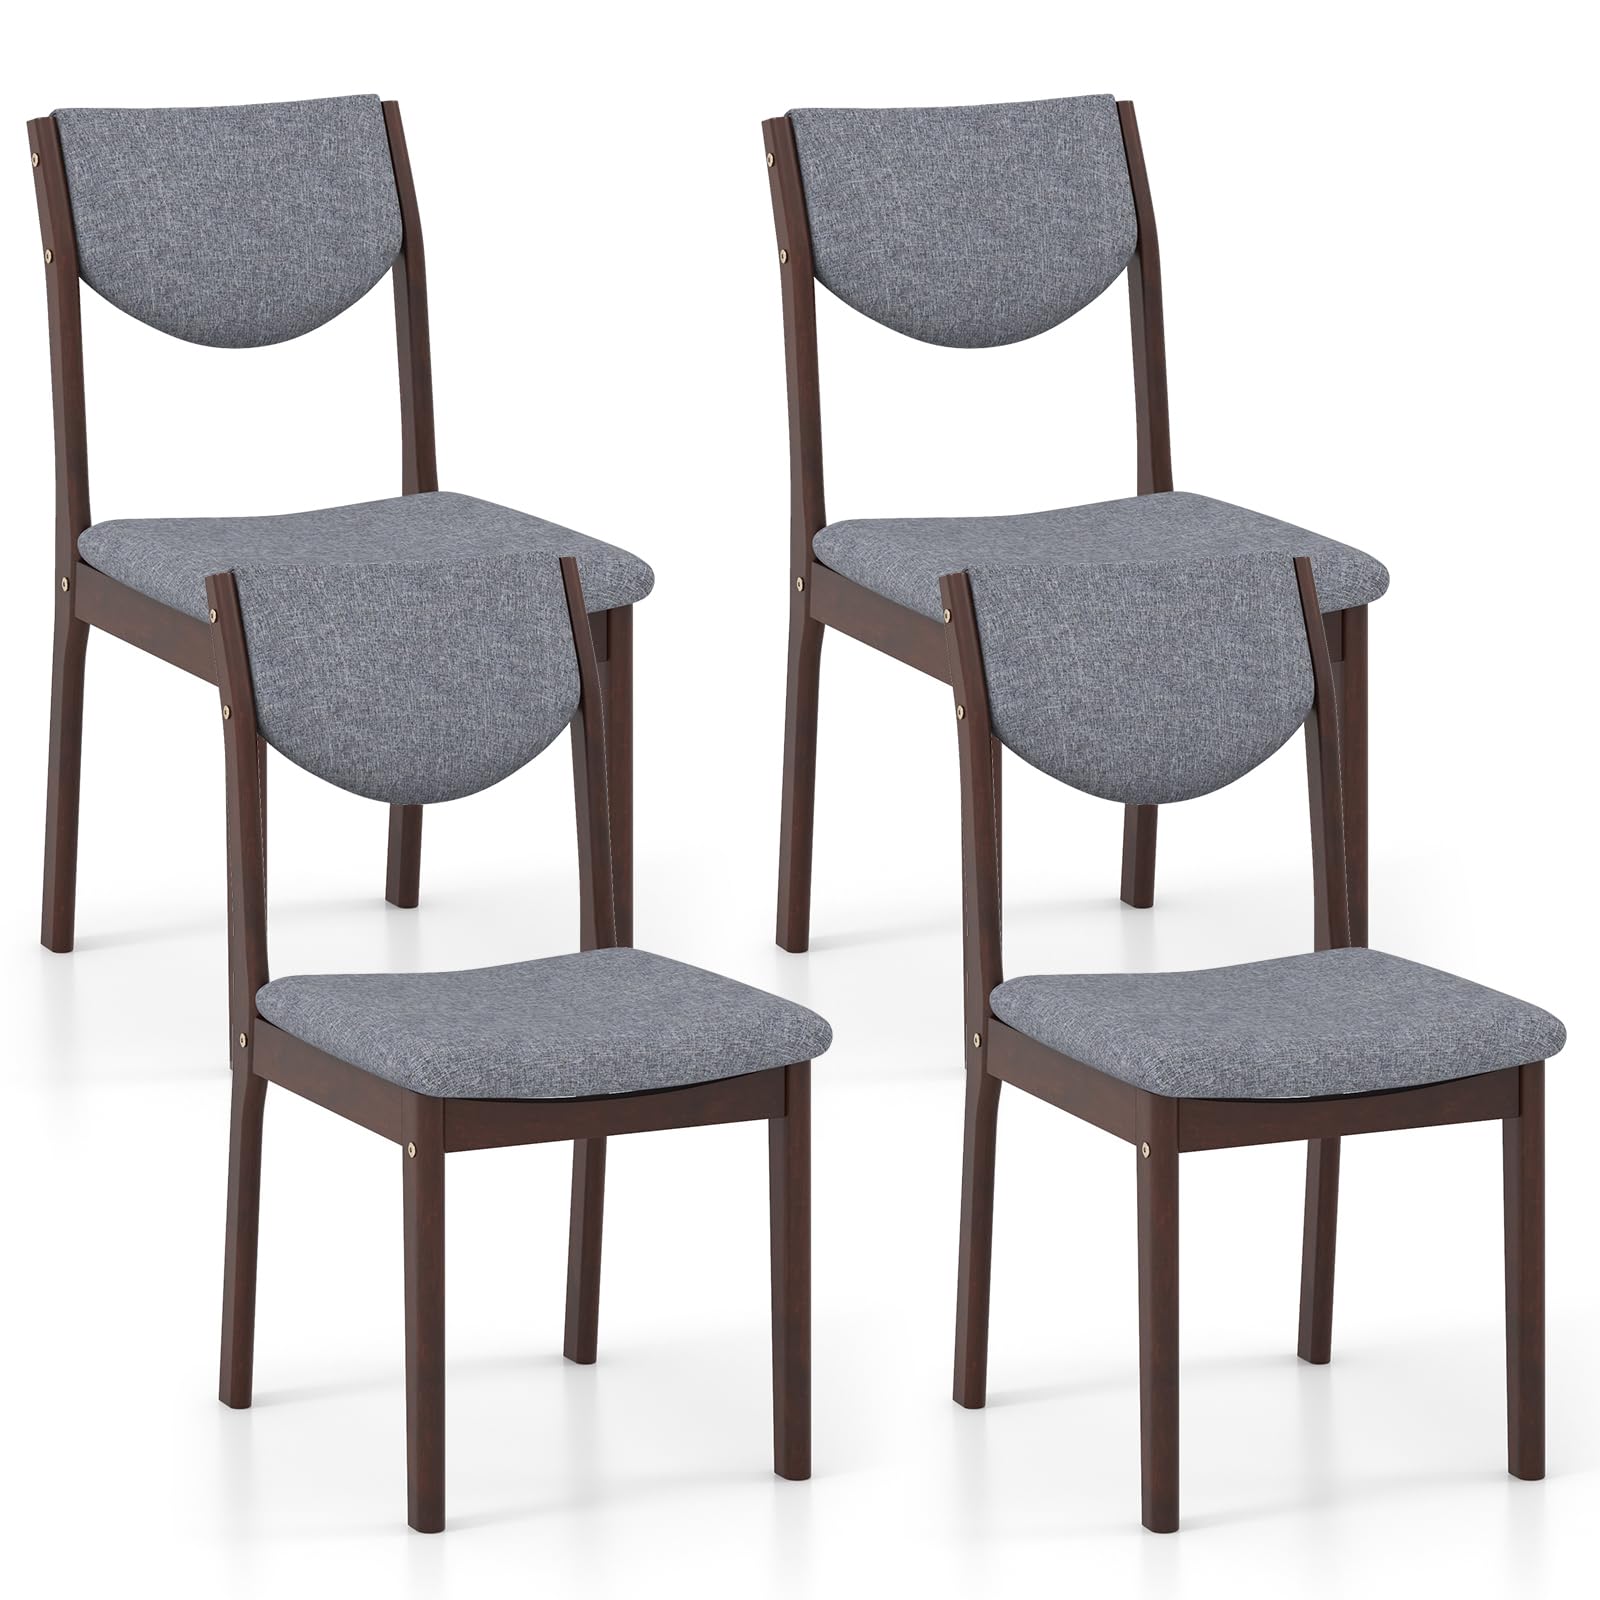 Giantex Wood Dining Chair, Wooden Kitchen Chairs with Rubber Wood Frame